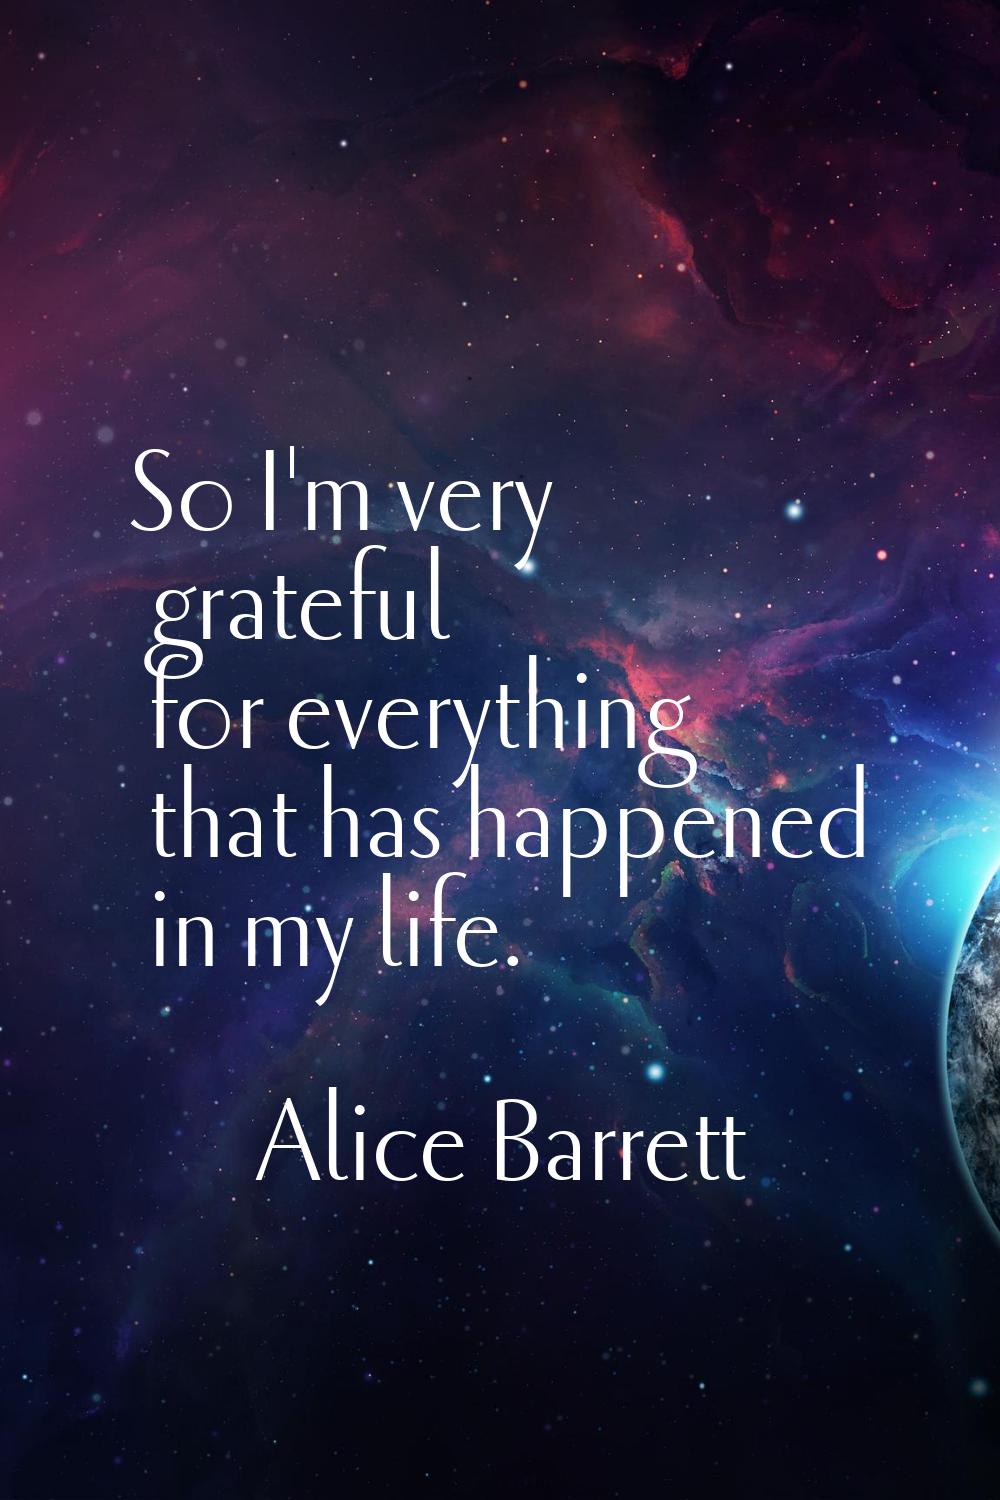 So I'm very grateful for everything that has happened in my life.